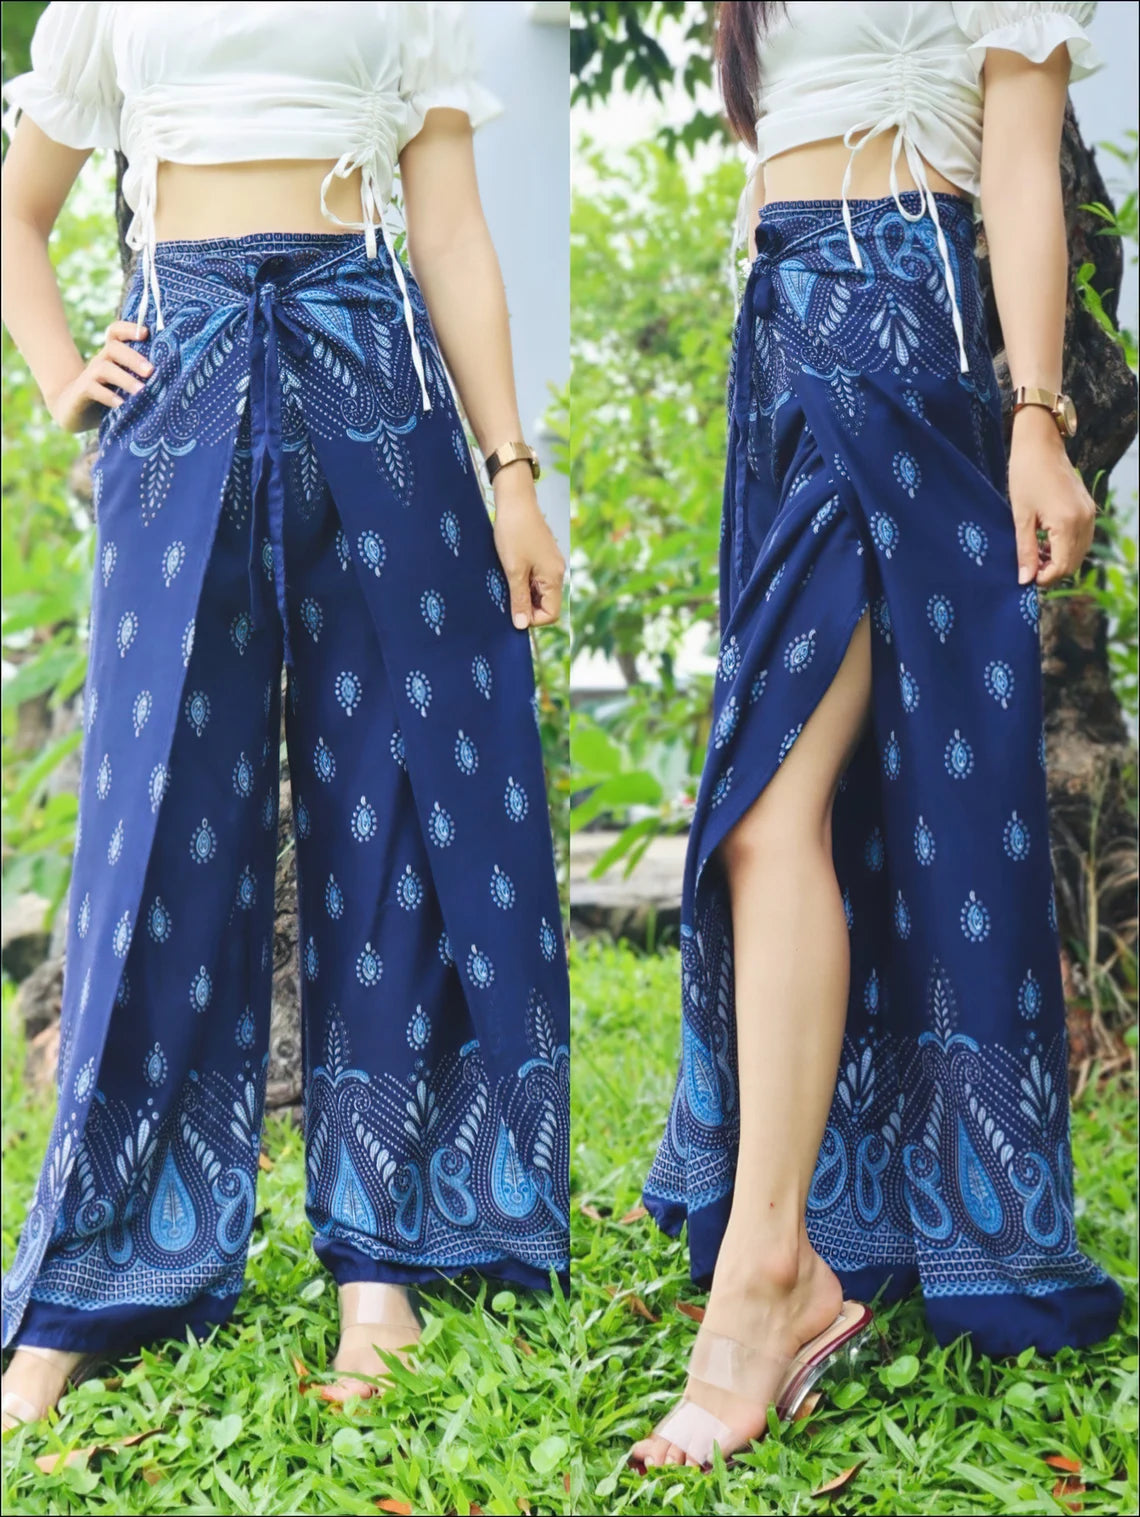 A person wearing boho blue wrap pants with intricate white patterns, paired with a white tied-up top, showcasing the front and side views of the outfit.